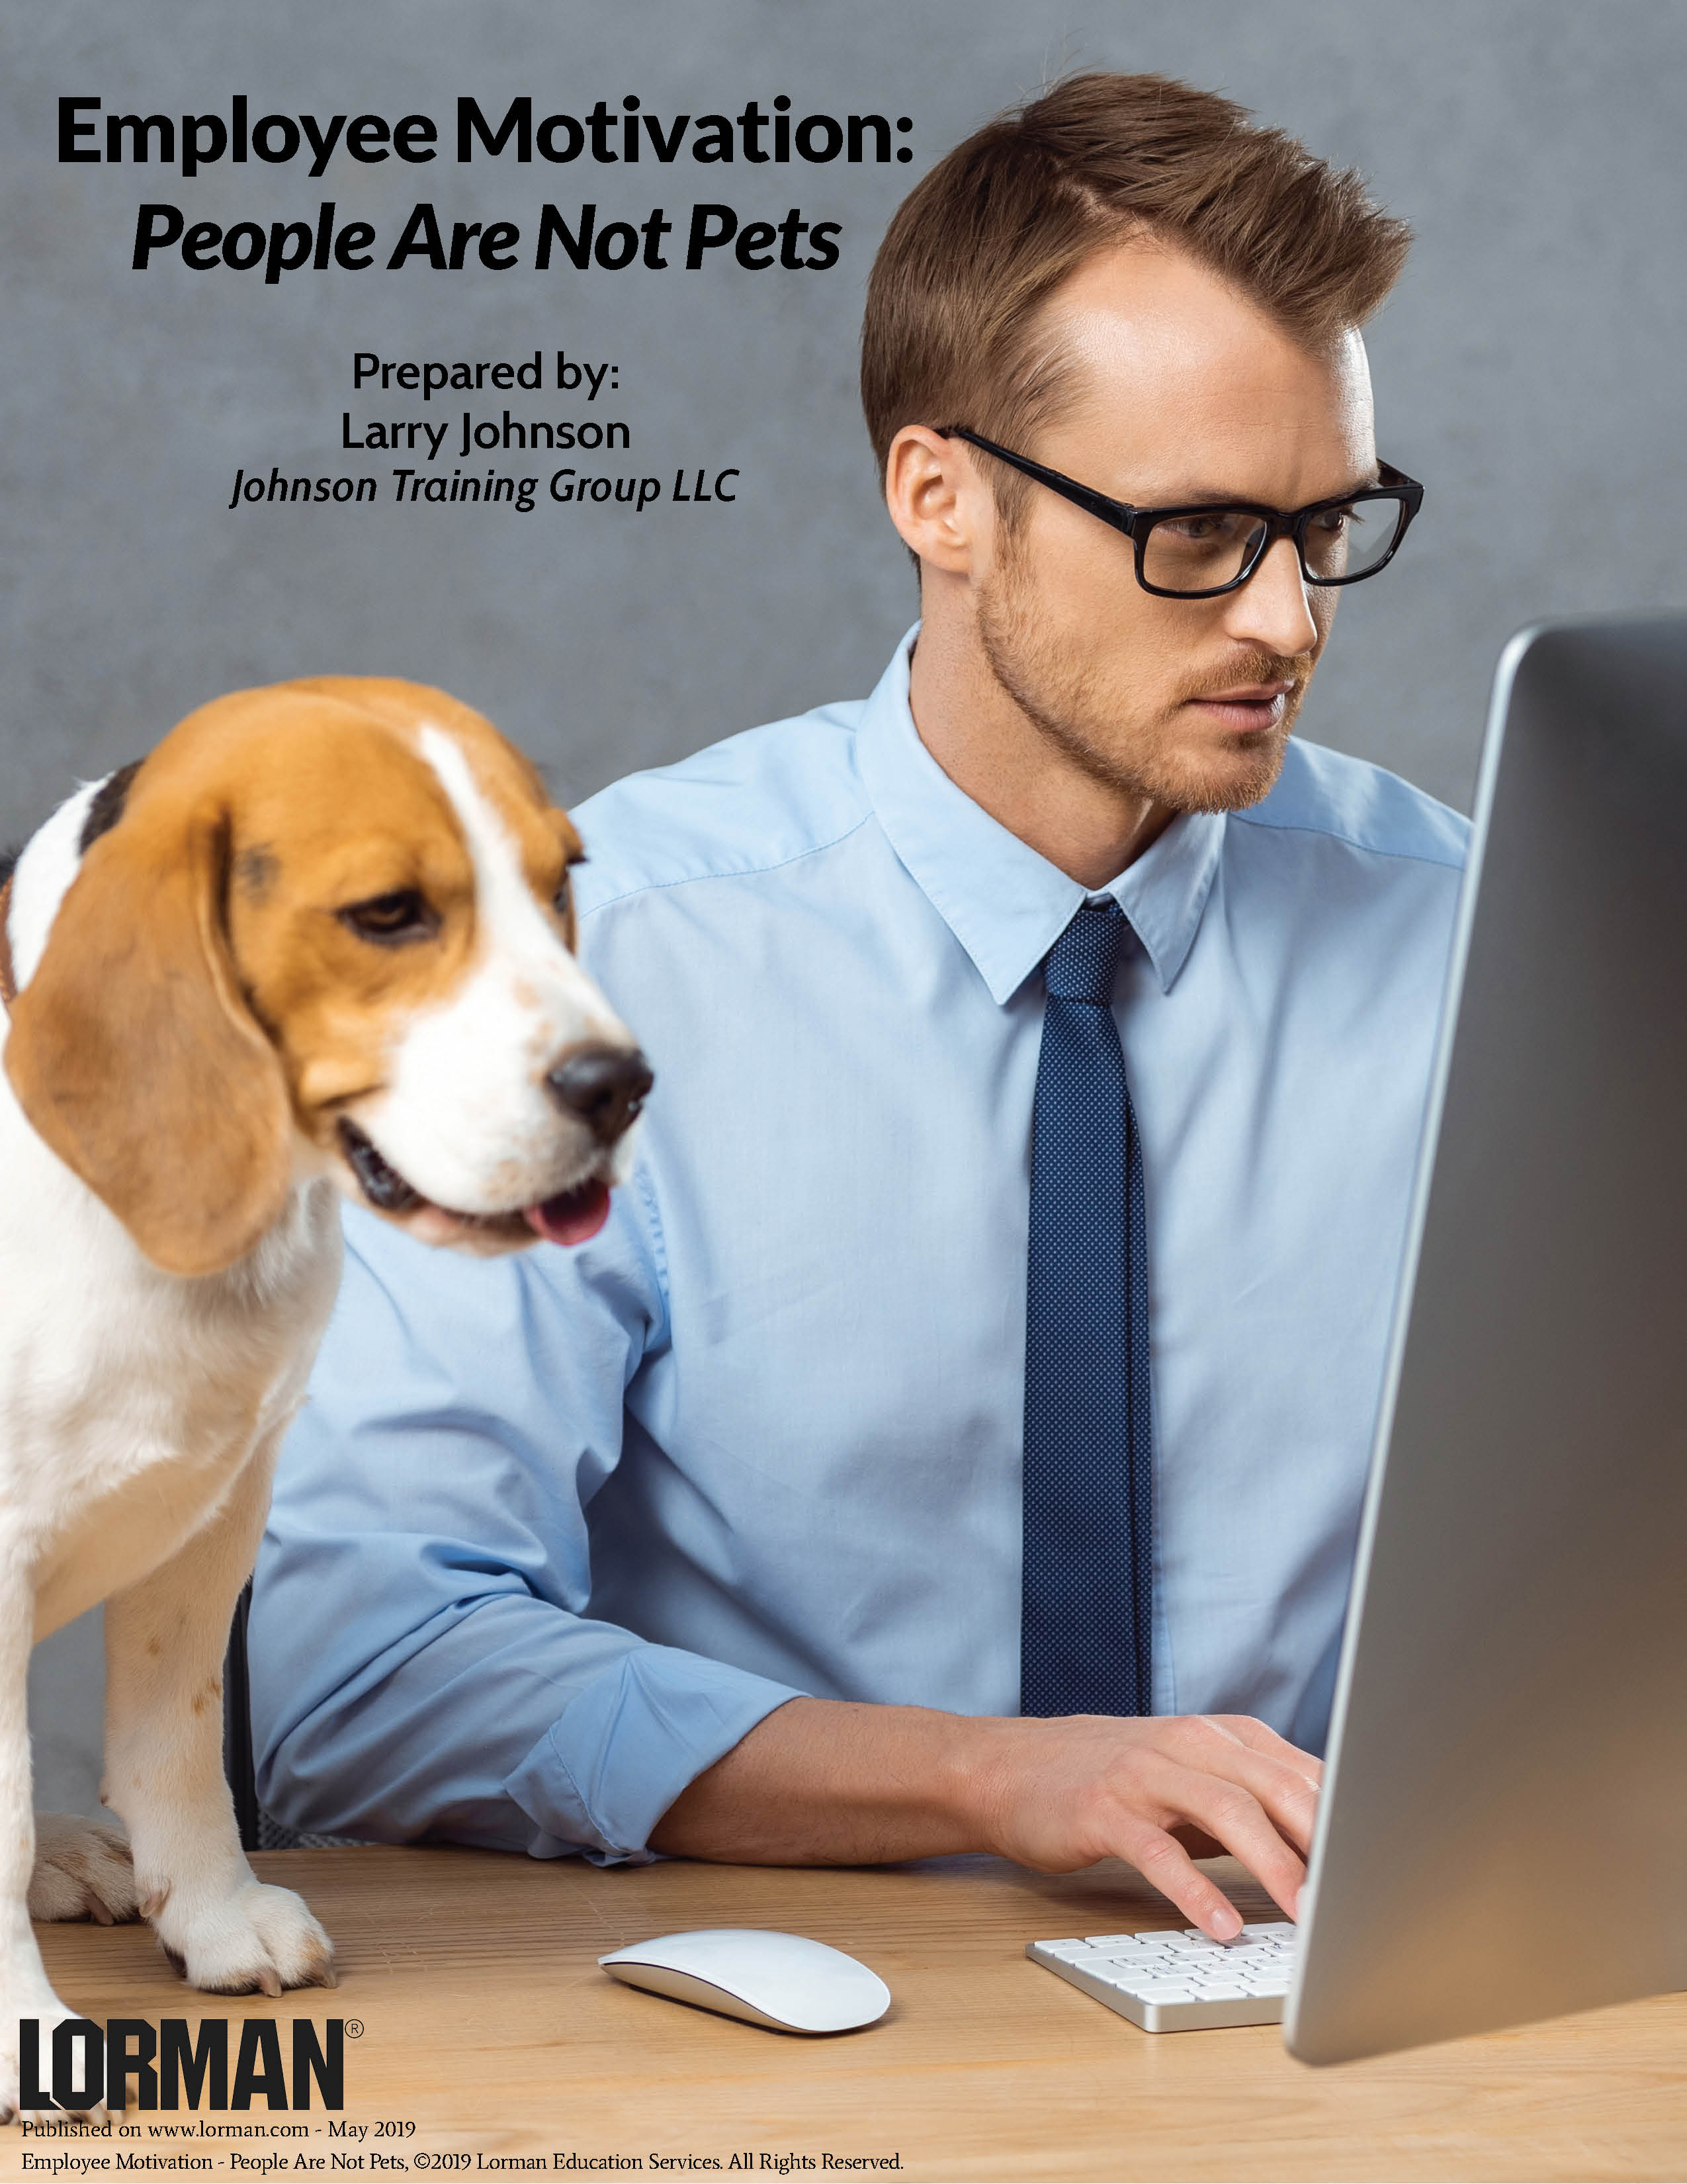 Employee Motivation: People Are Not Pets